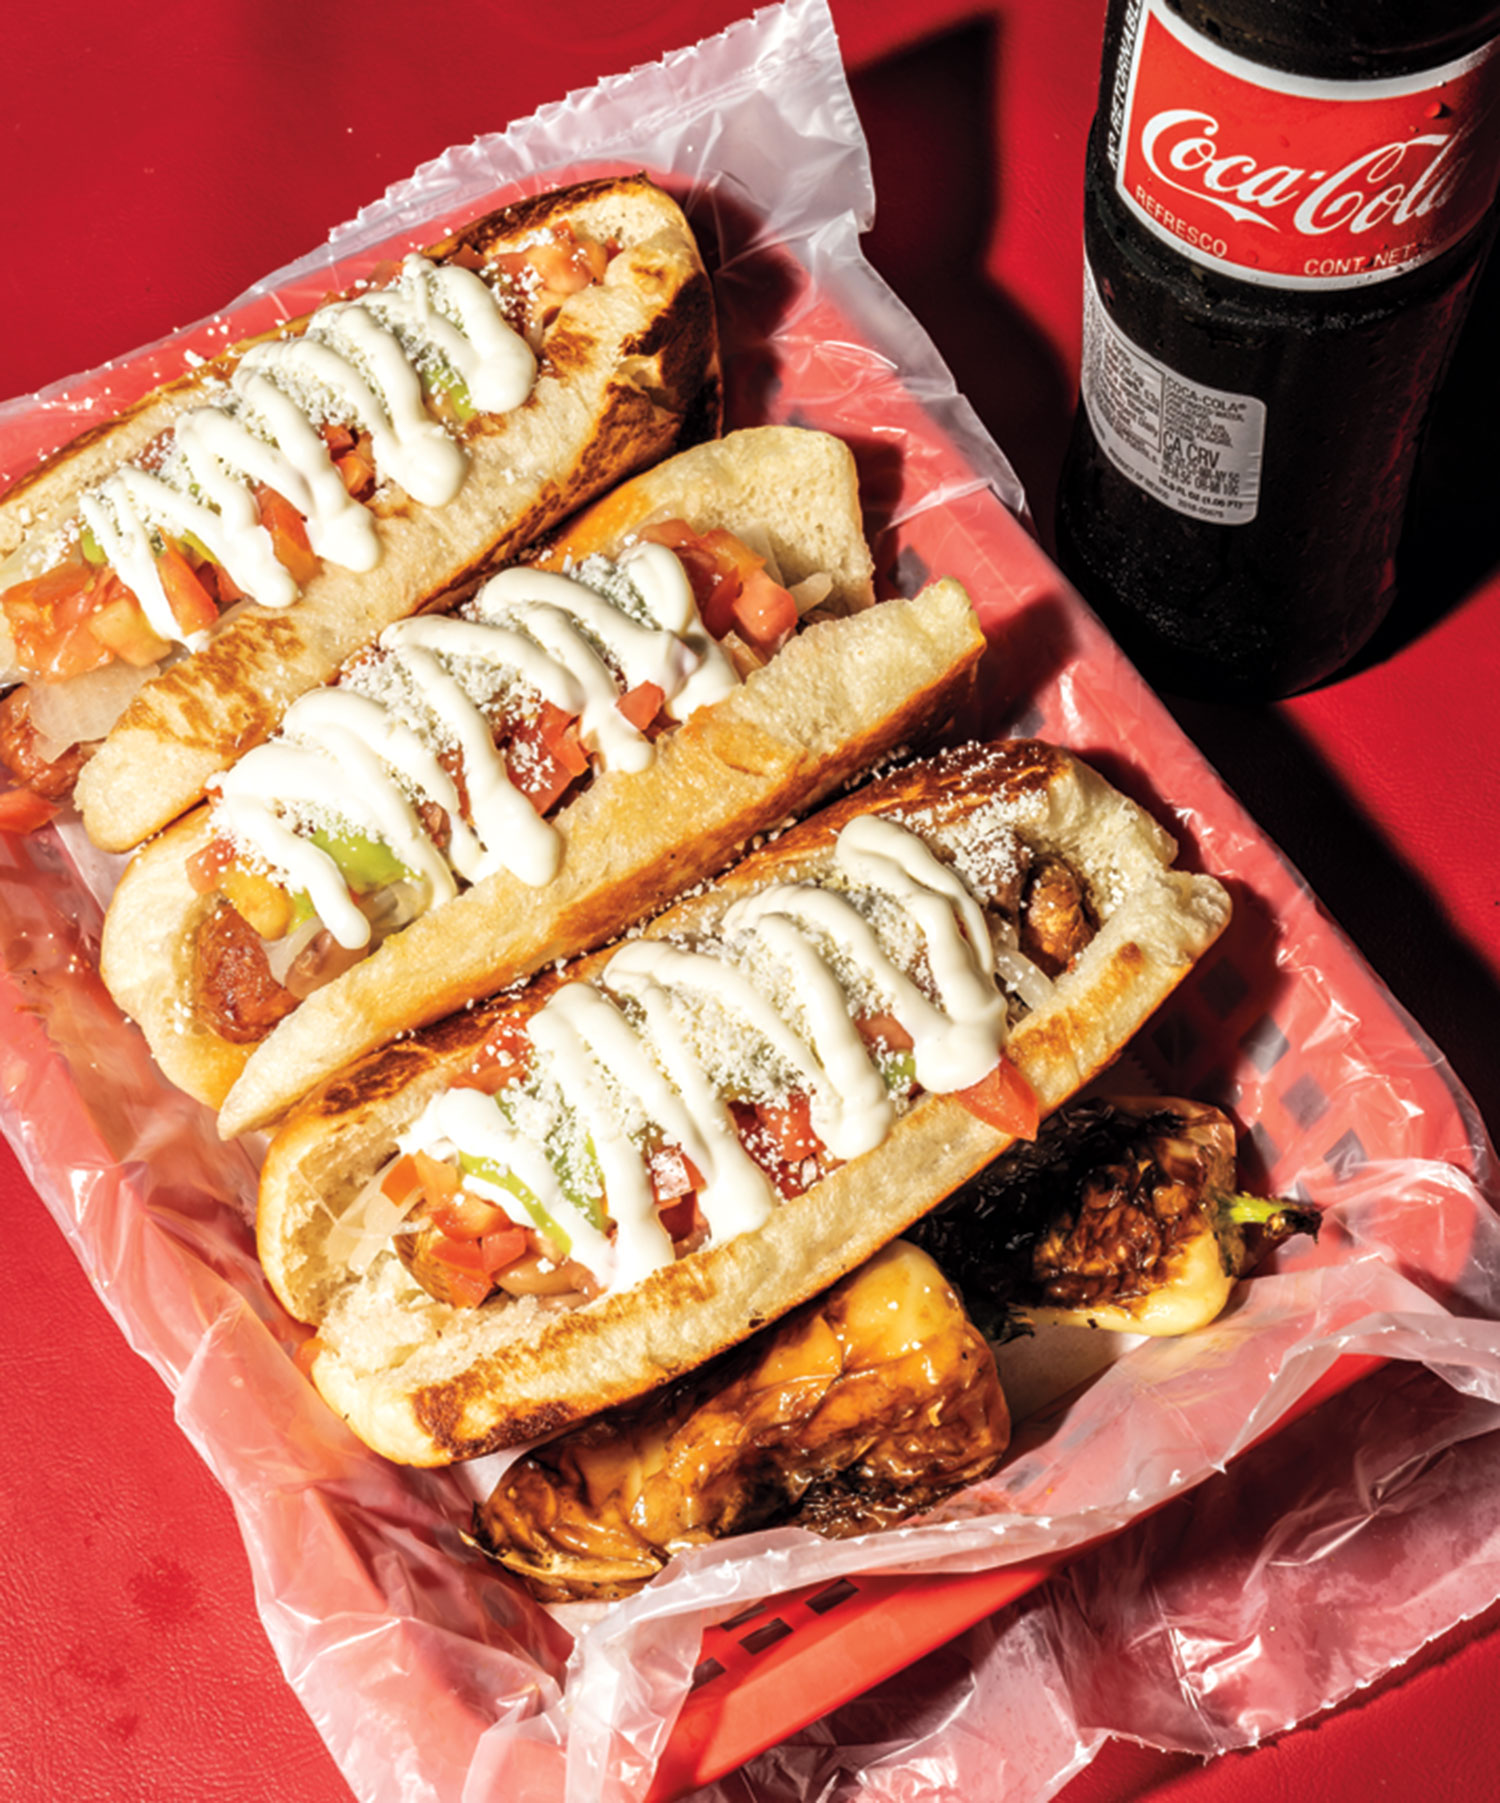 photo by Shelby Moore: Lupita's Hot Dogs